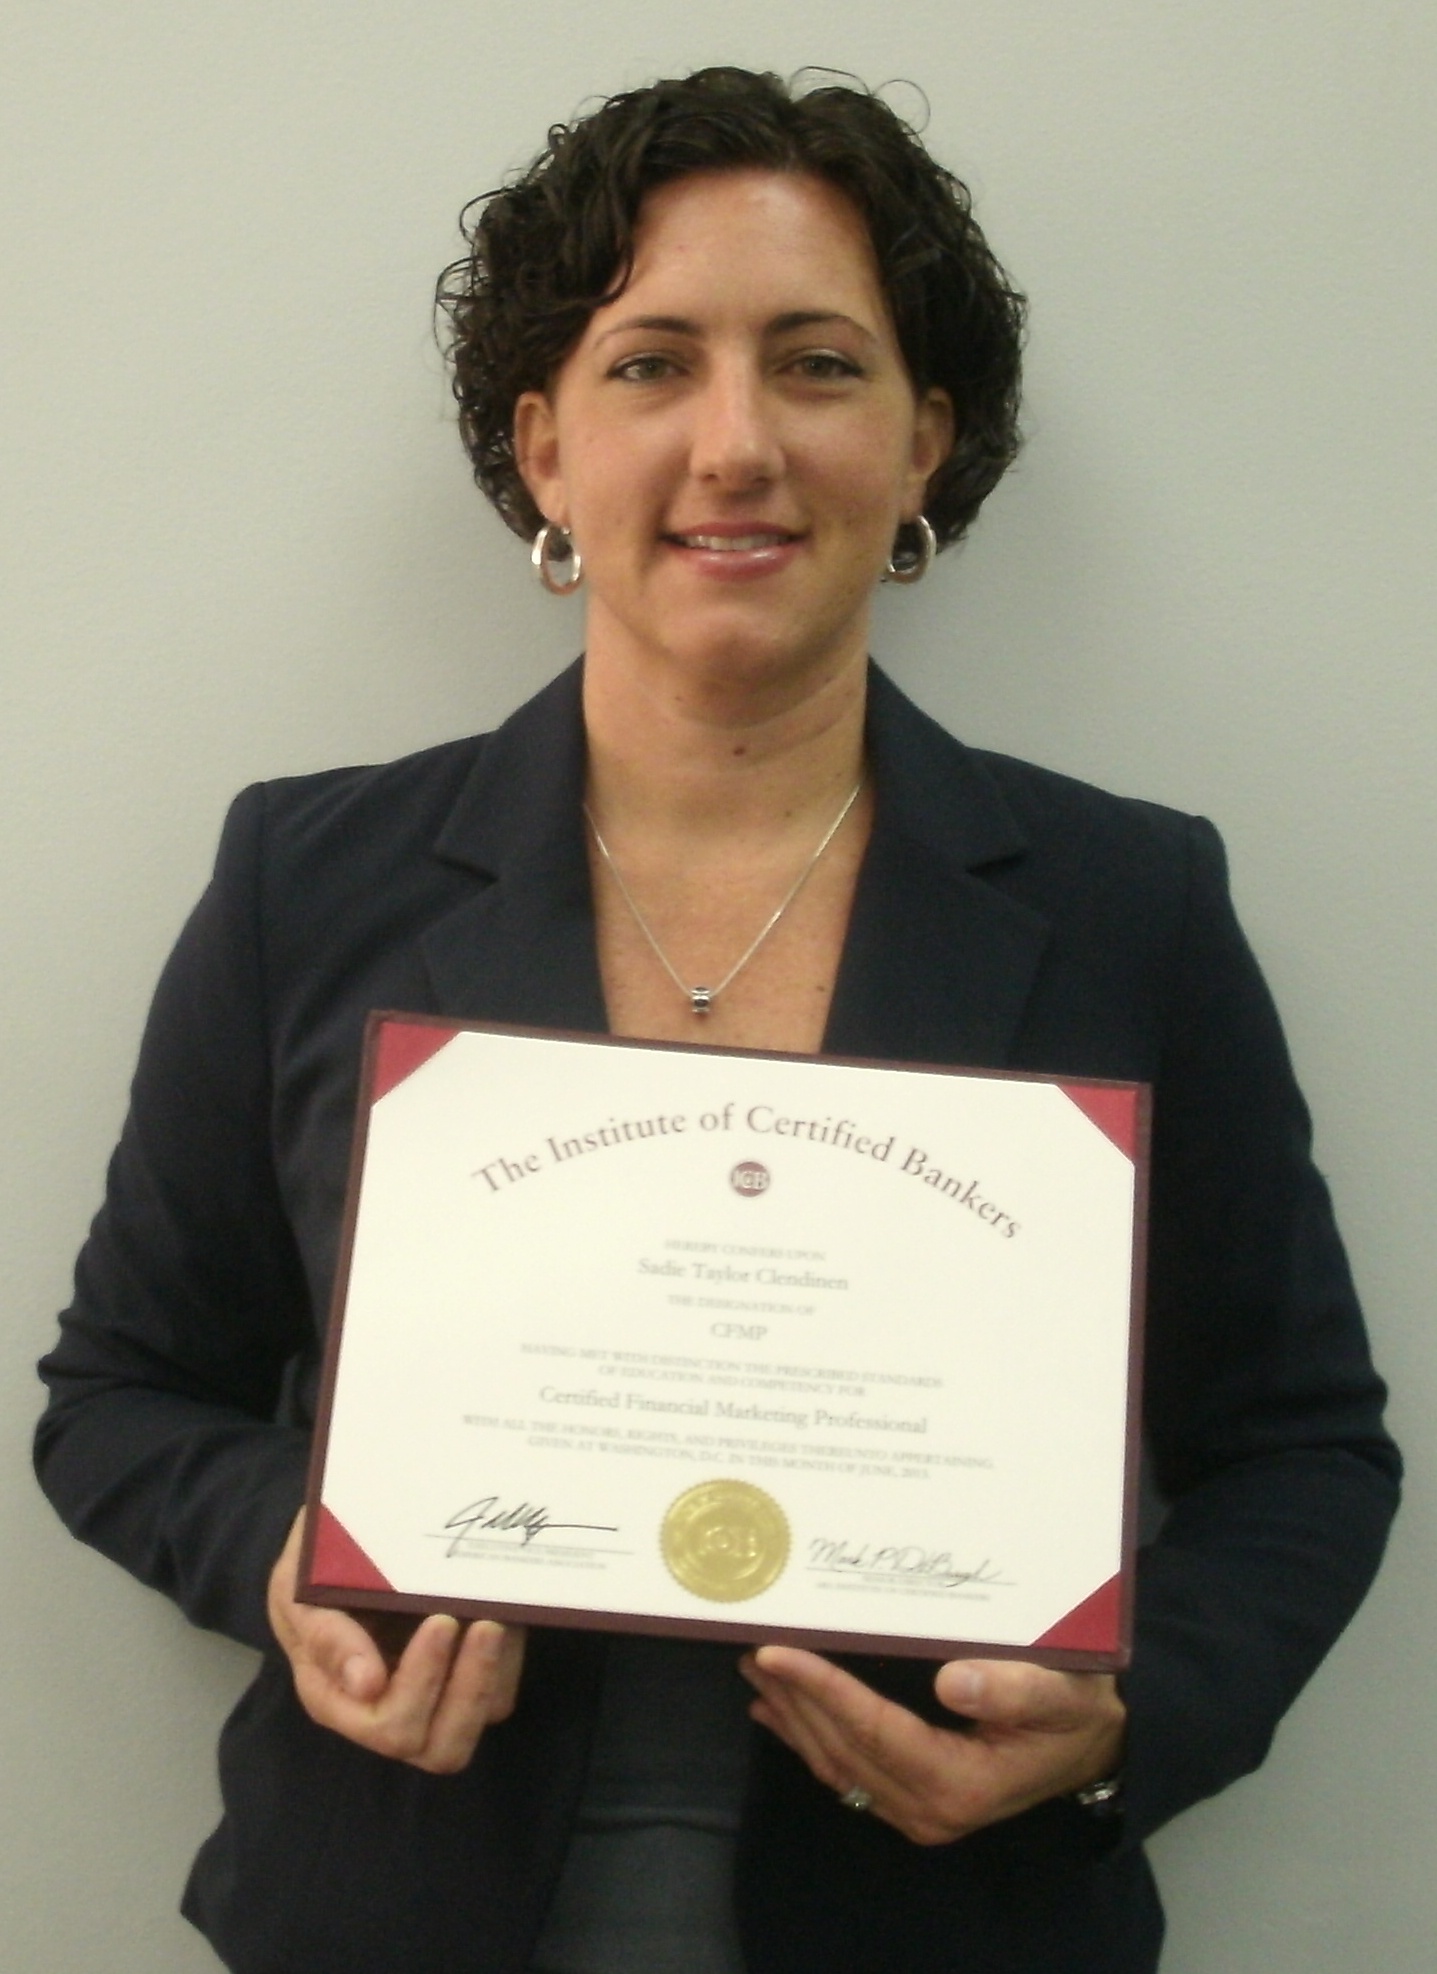 Local Financial Service Professional Earns National Certification